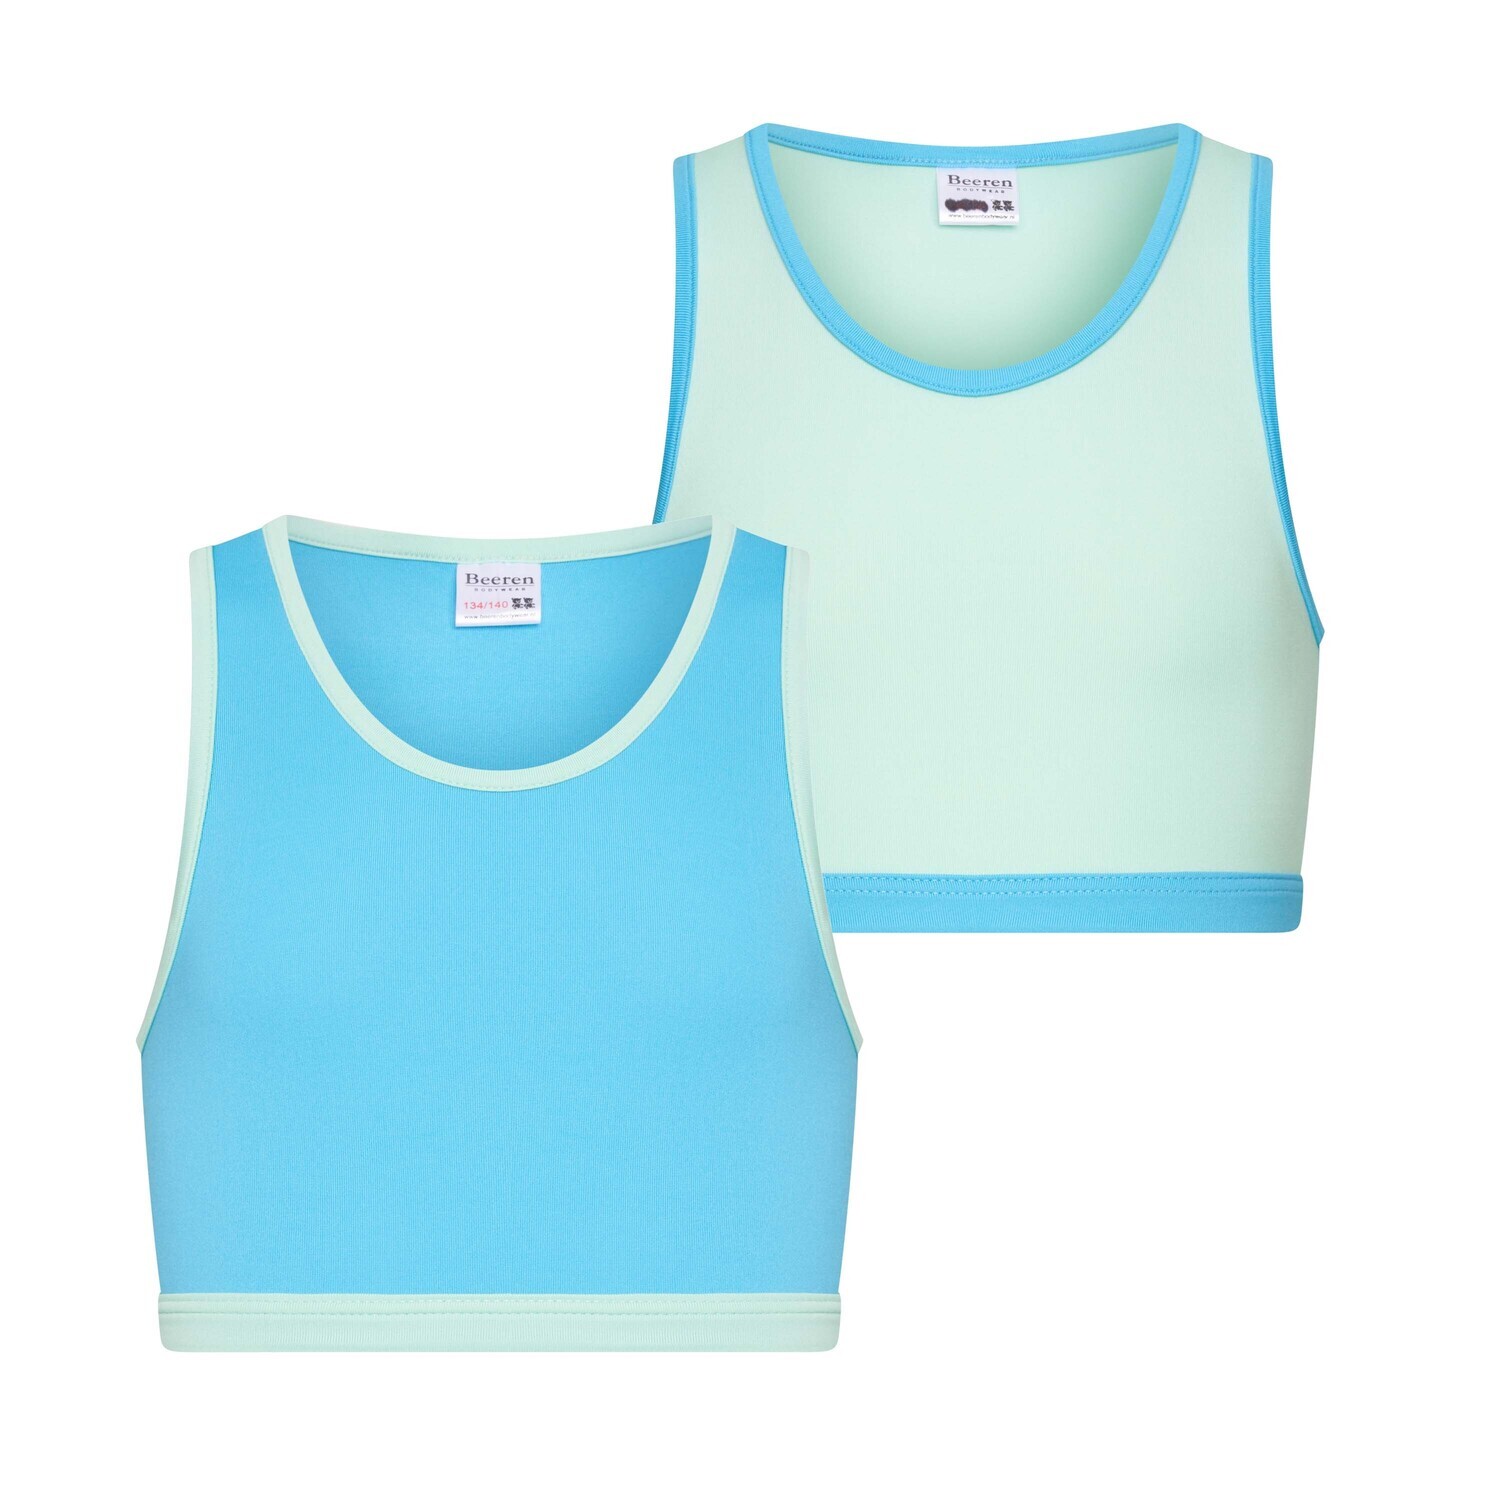 (08-251) Meisjes hesje Mix and Match 2-Pack turquoise/mint 146/152